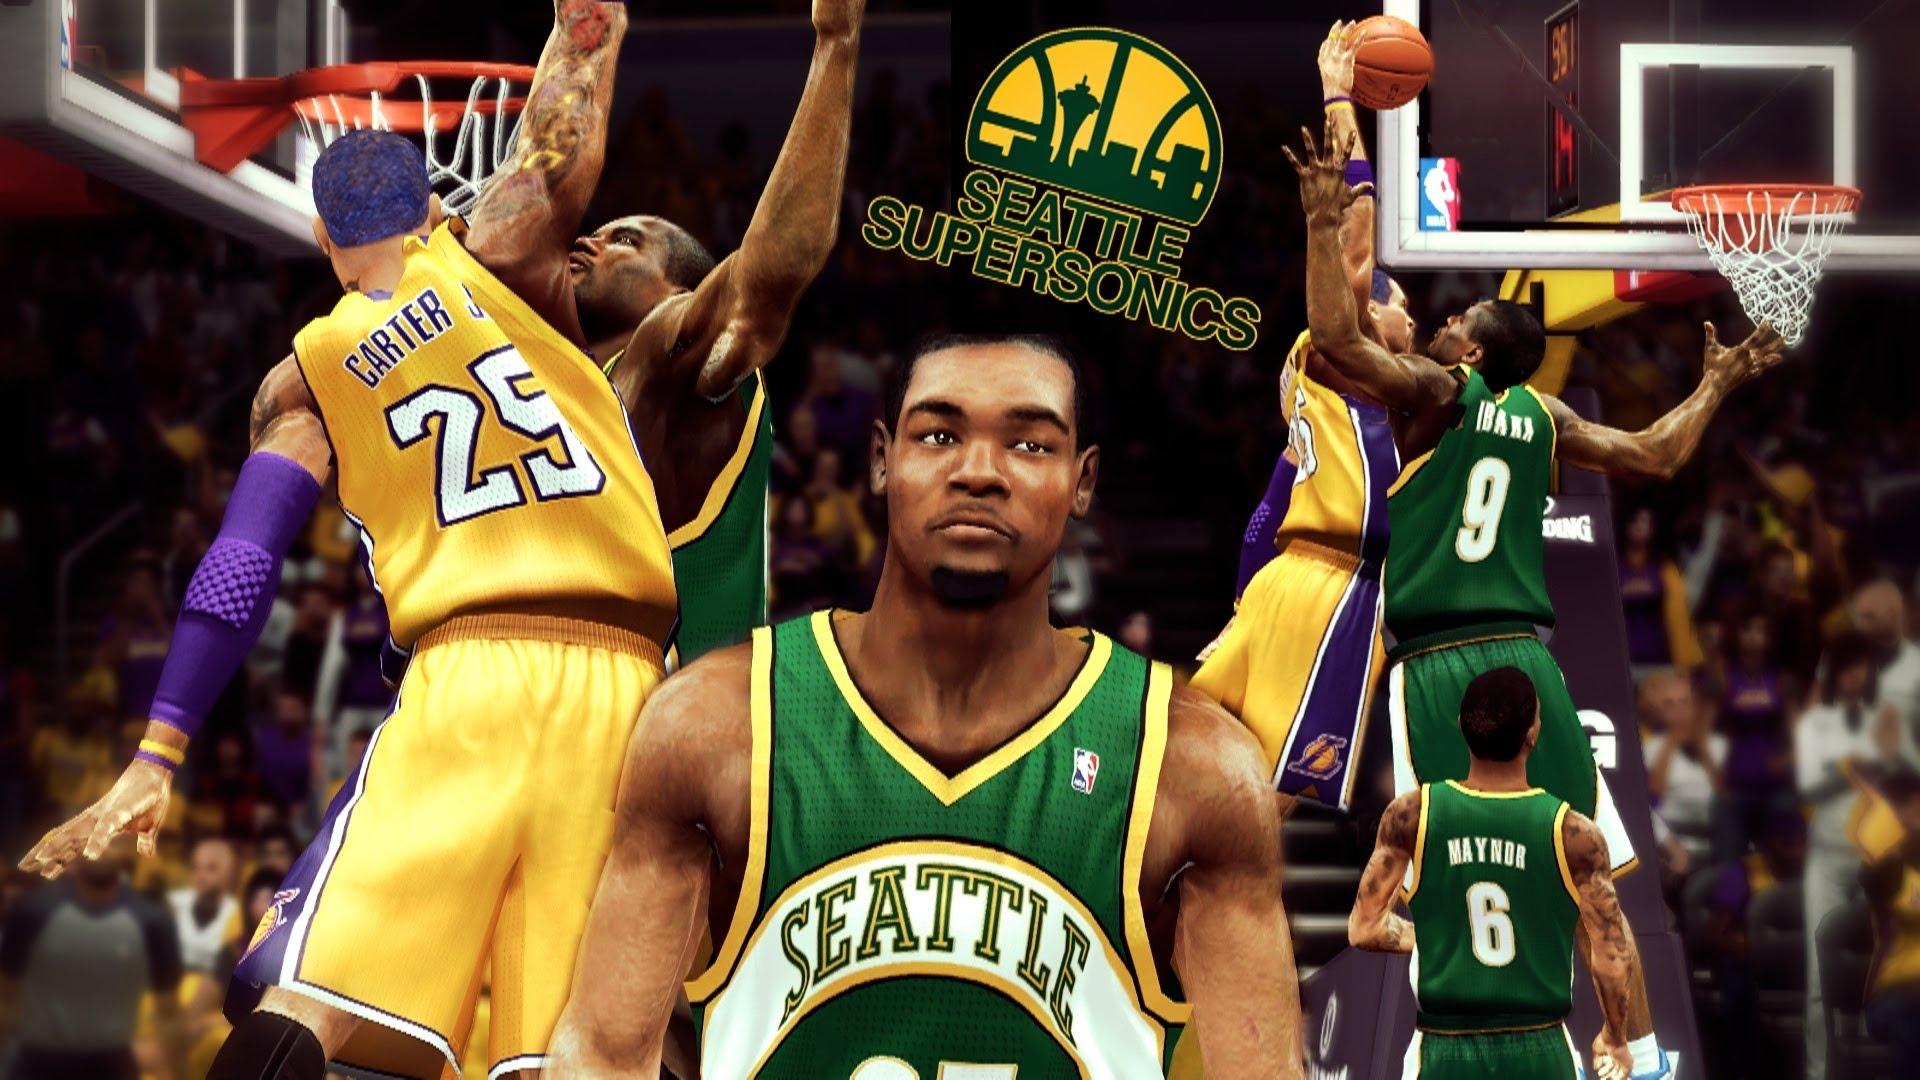 Seattle Supersonics Wallpaper Pack, by Megan Farr, Sunday 04th